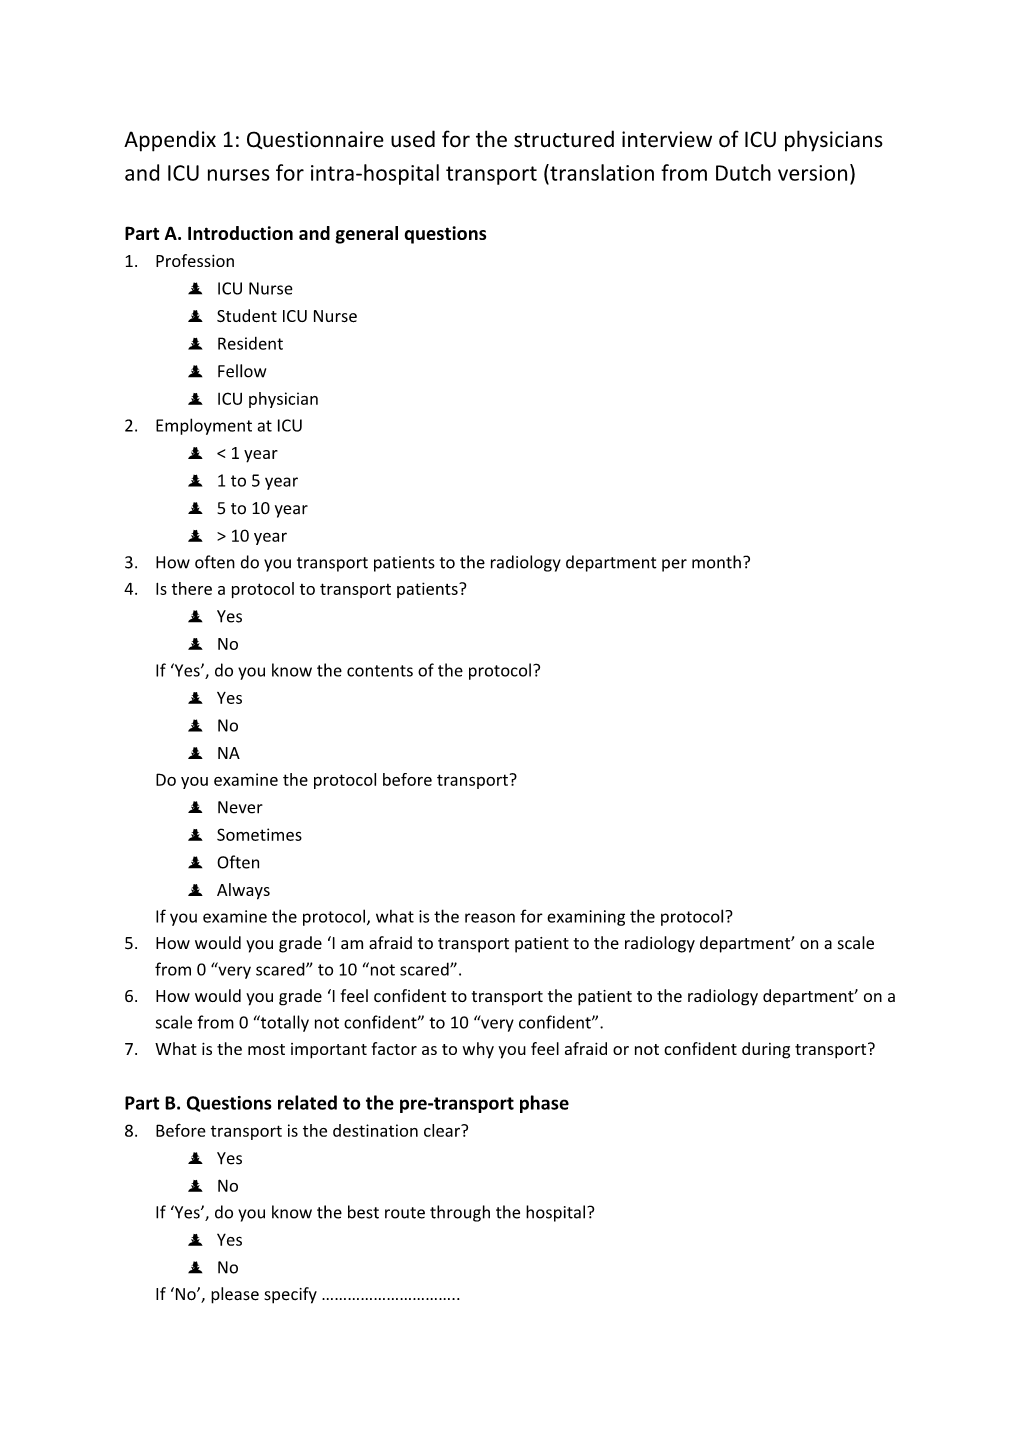 Part A. Introduction and General Questions